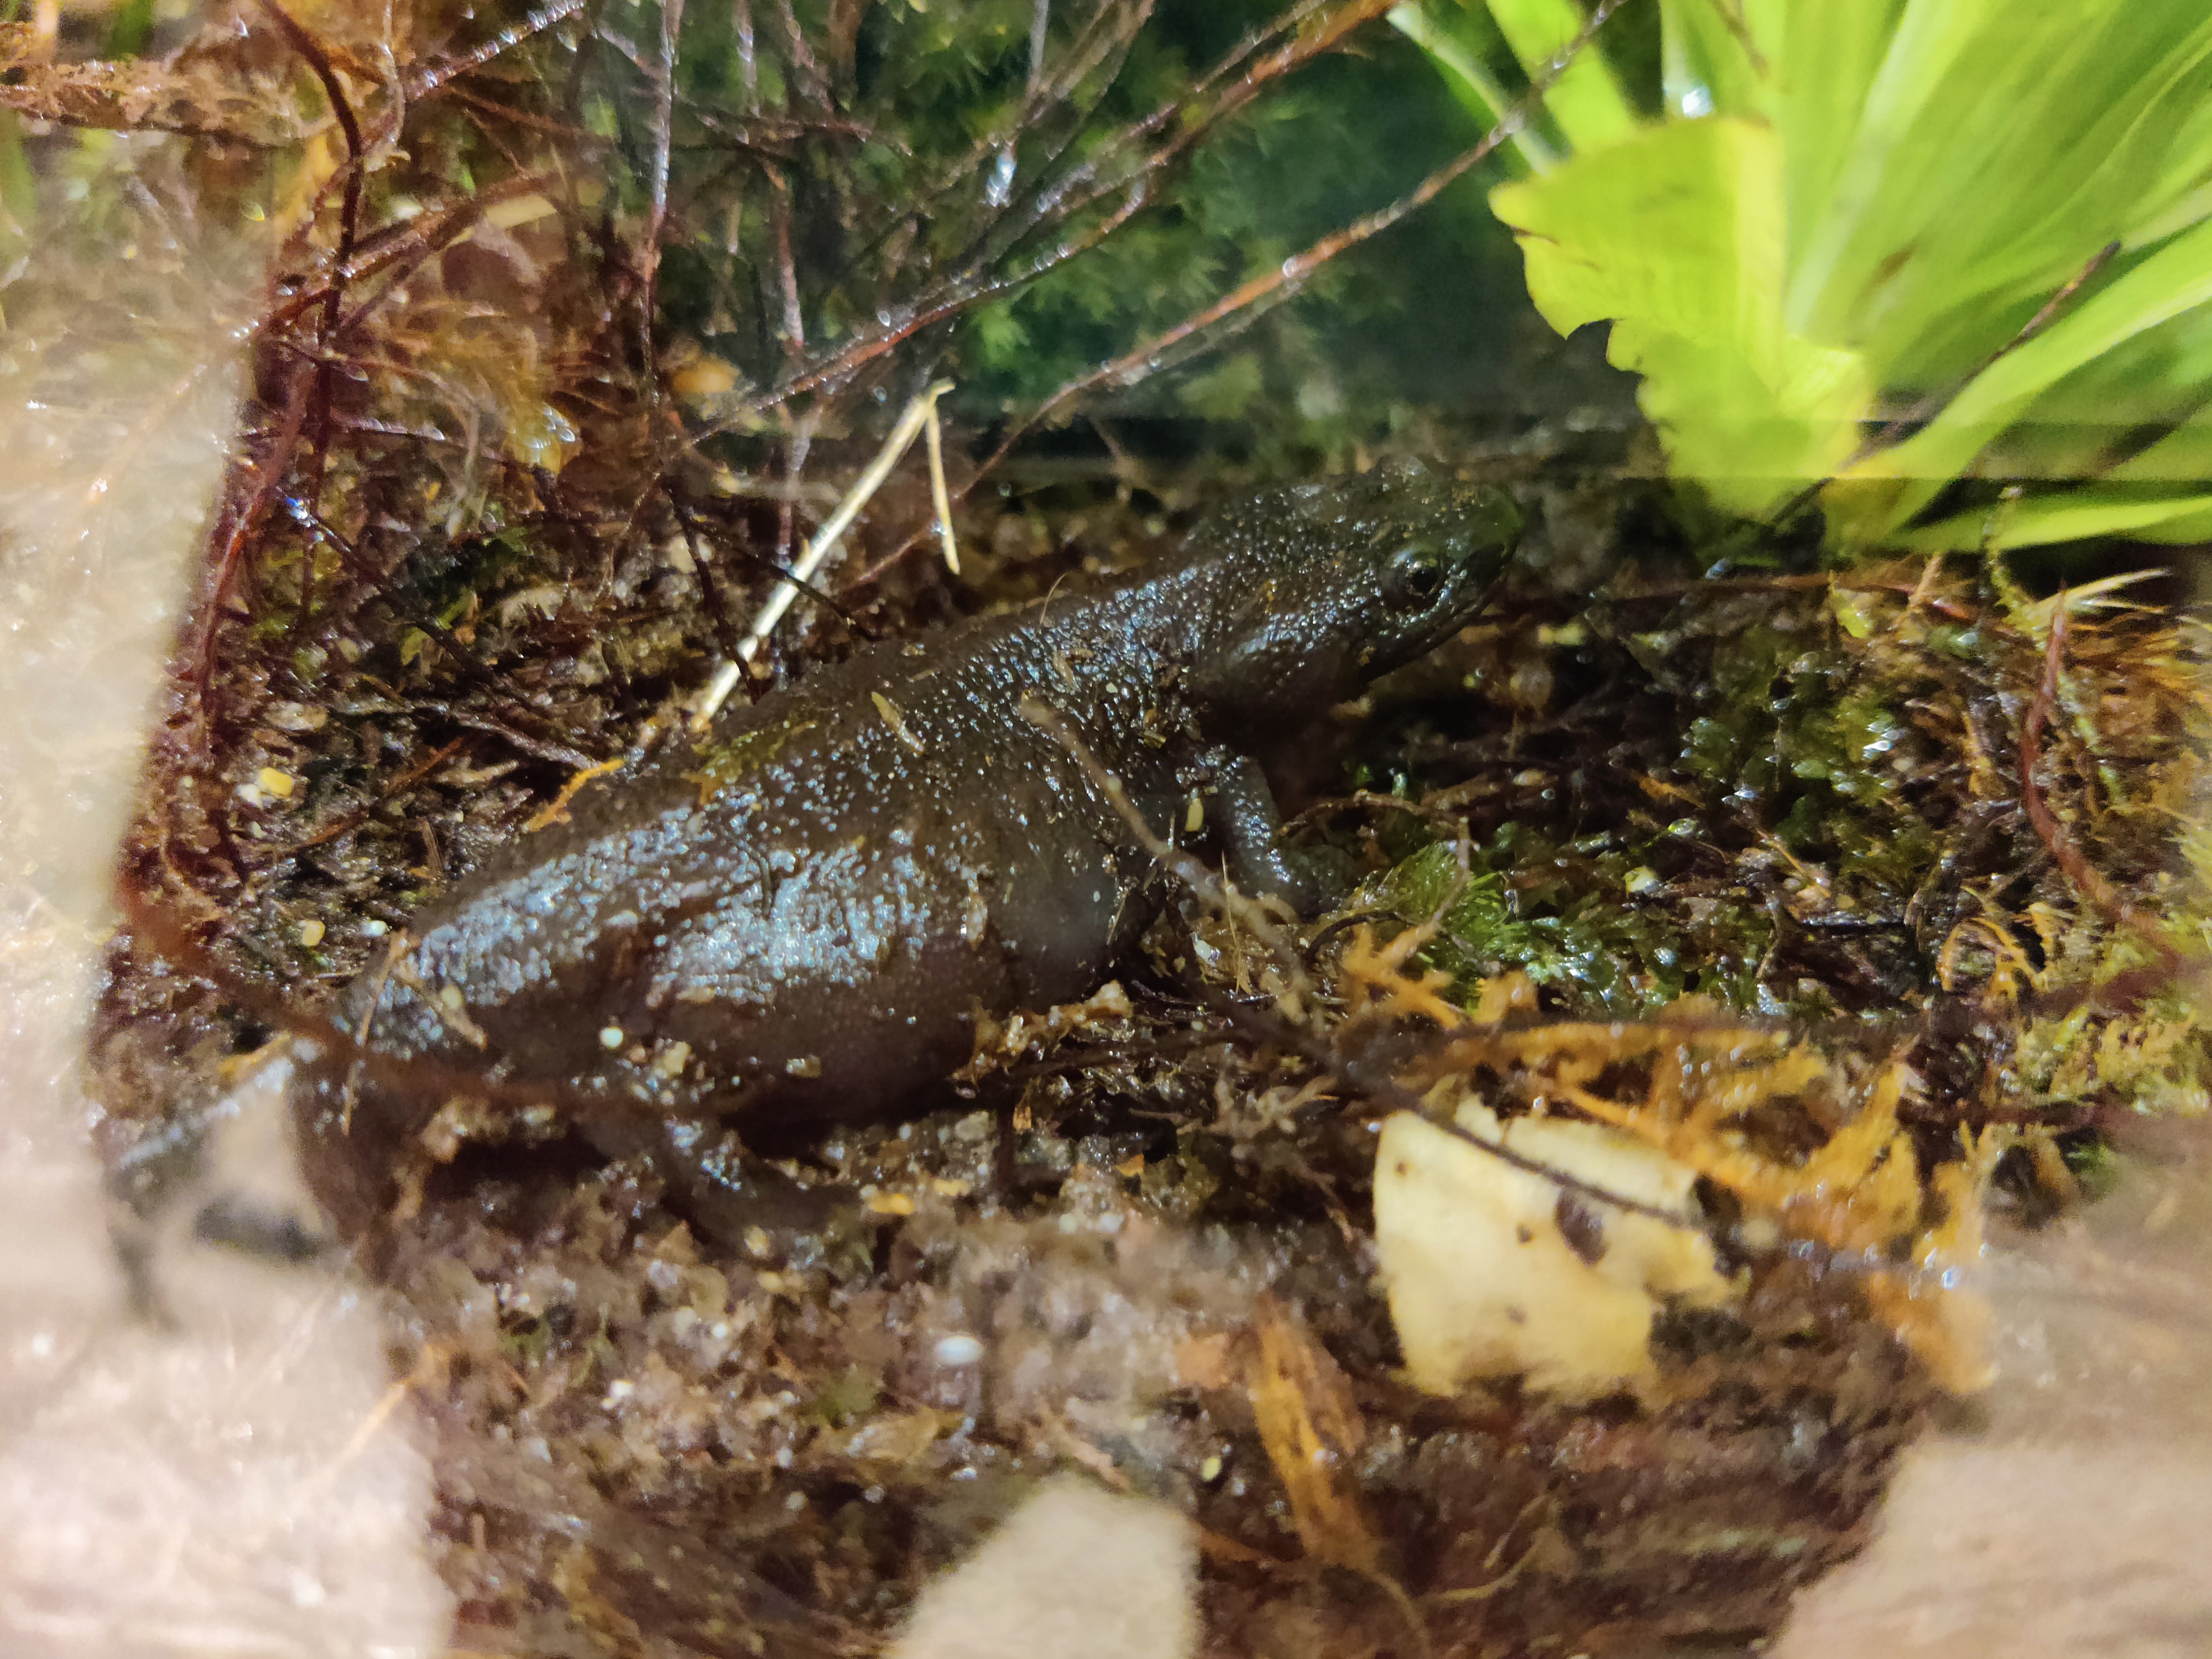 We have almost reached the target numbers for the Vietnamese crocodile newts. | Carina Thomassen